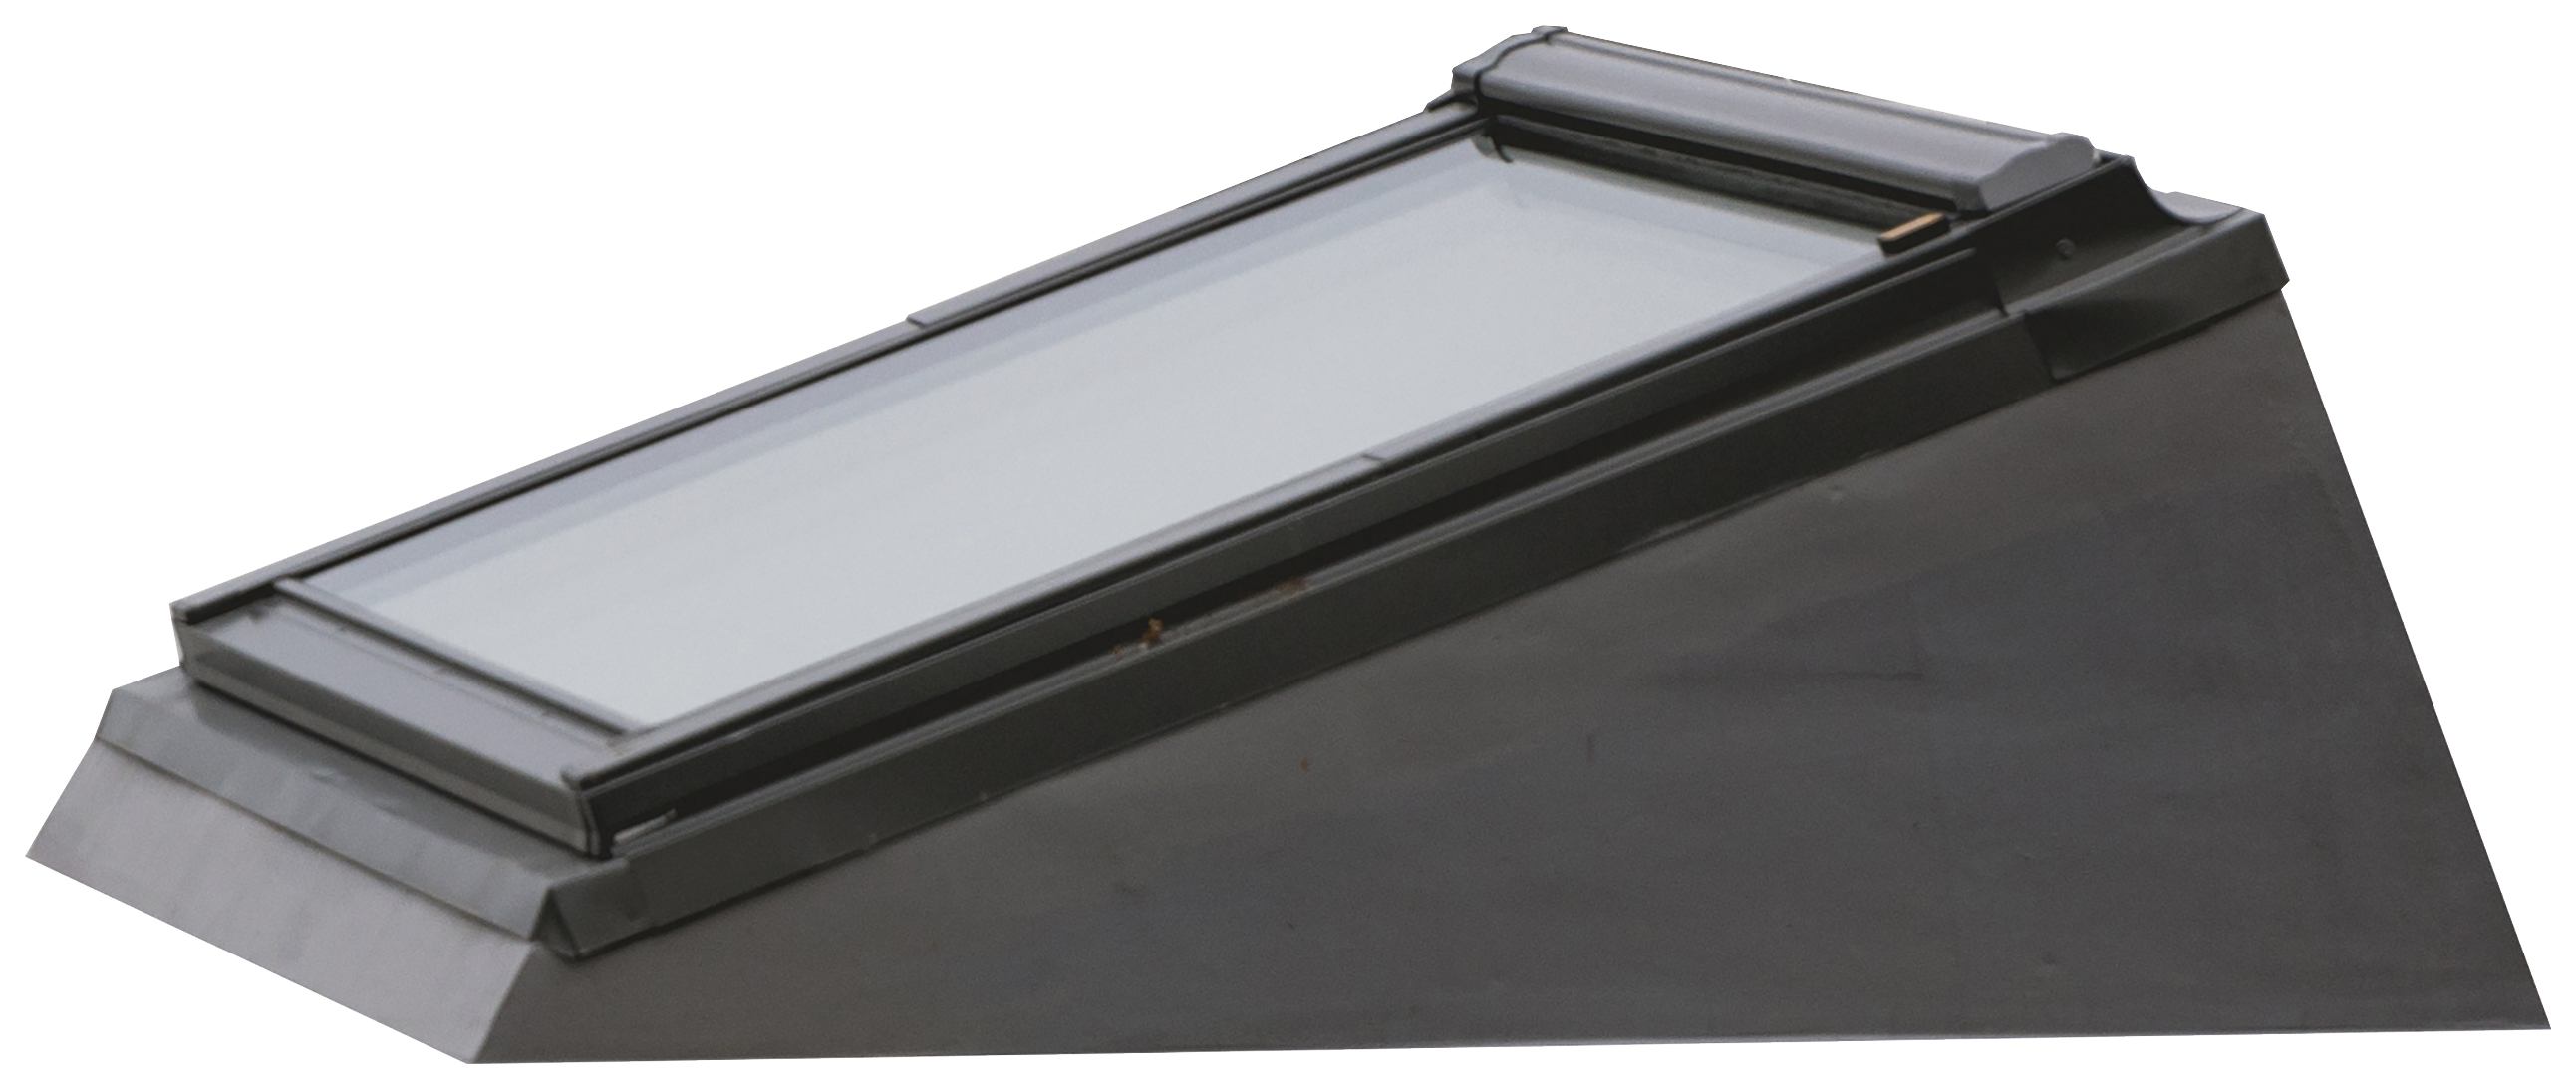 Image of Keylite FRS 02 Flat Roof System - 550 X 980mm